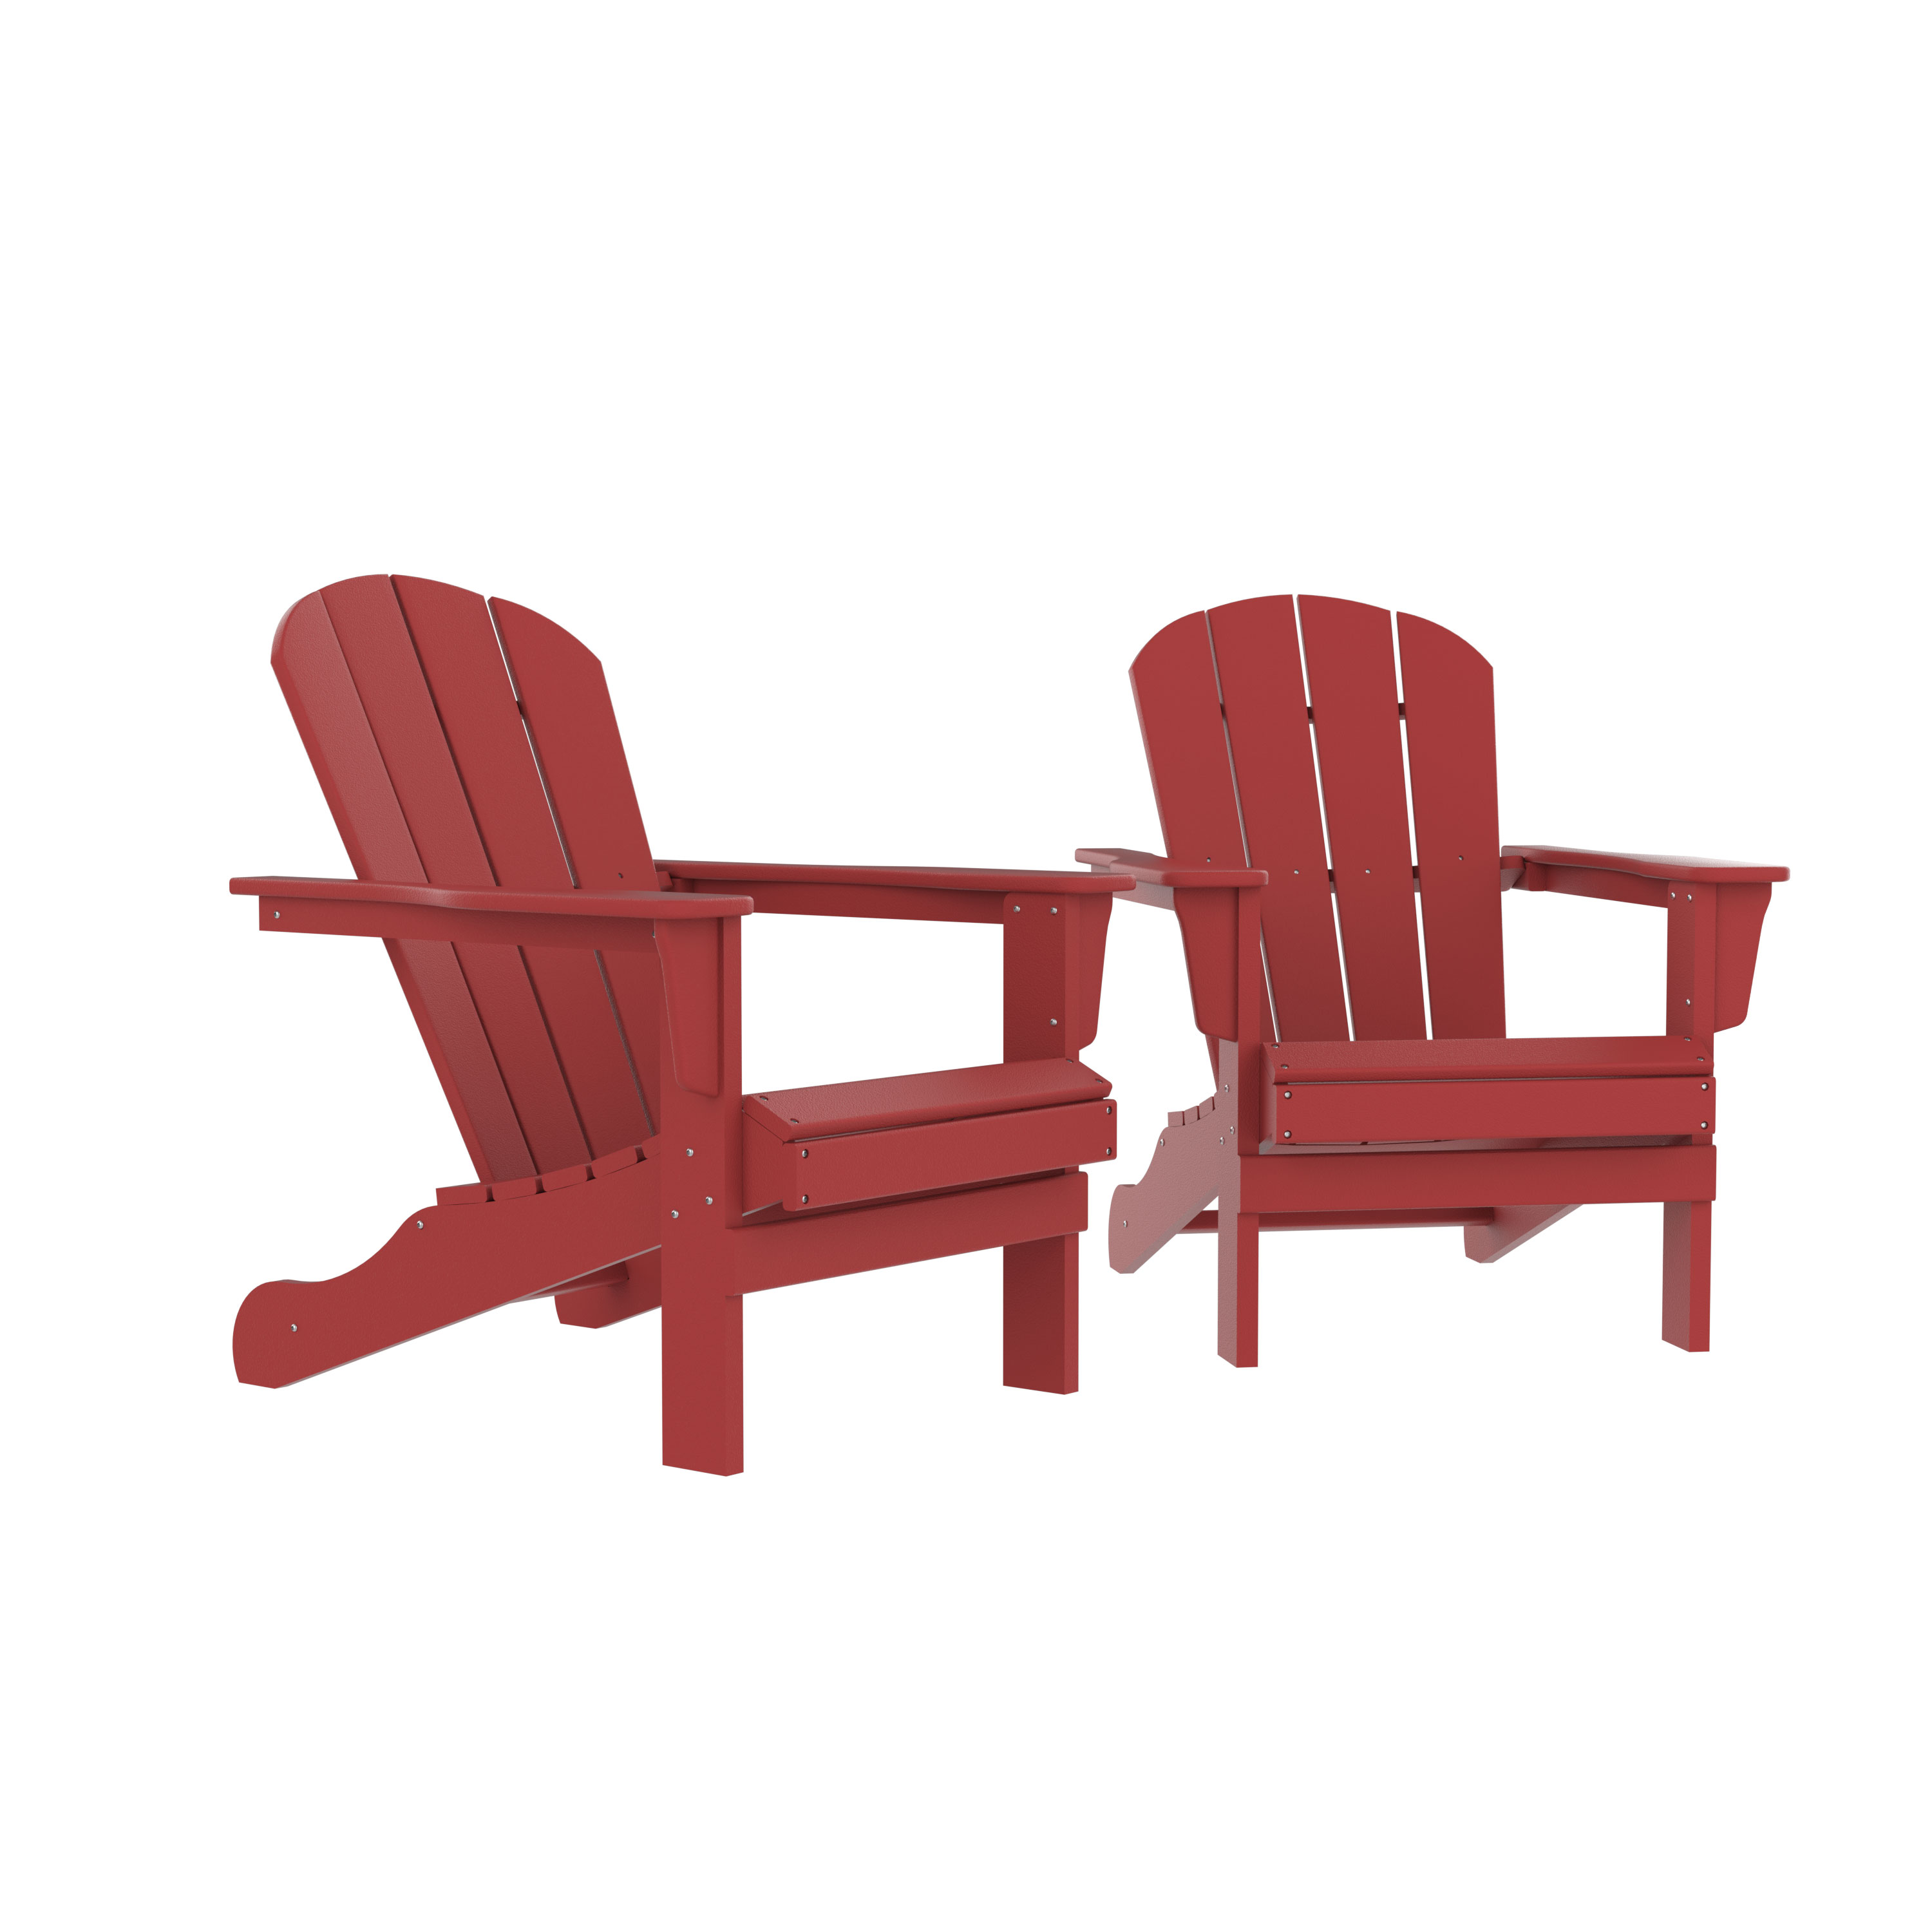 HDPE Adirondack Chair, Fire Pit Chairs, Sand Chair, Patio Outdoor Chairs,DPE Plastic Resin Deck Chair, lawn chairs, Adult Size ,Weather Resistant for Patio/ Backyard/Garden, Red, Set of 2 - image 1 of 4